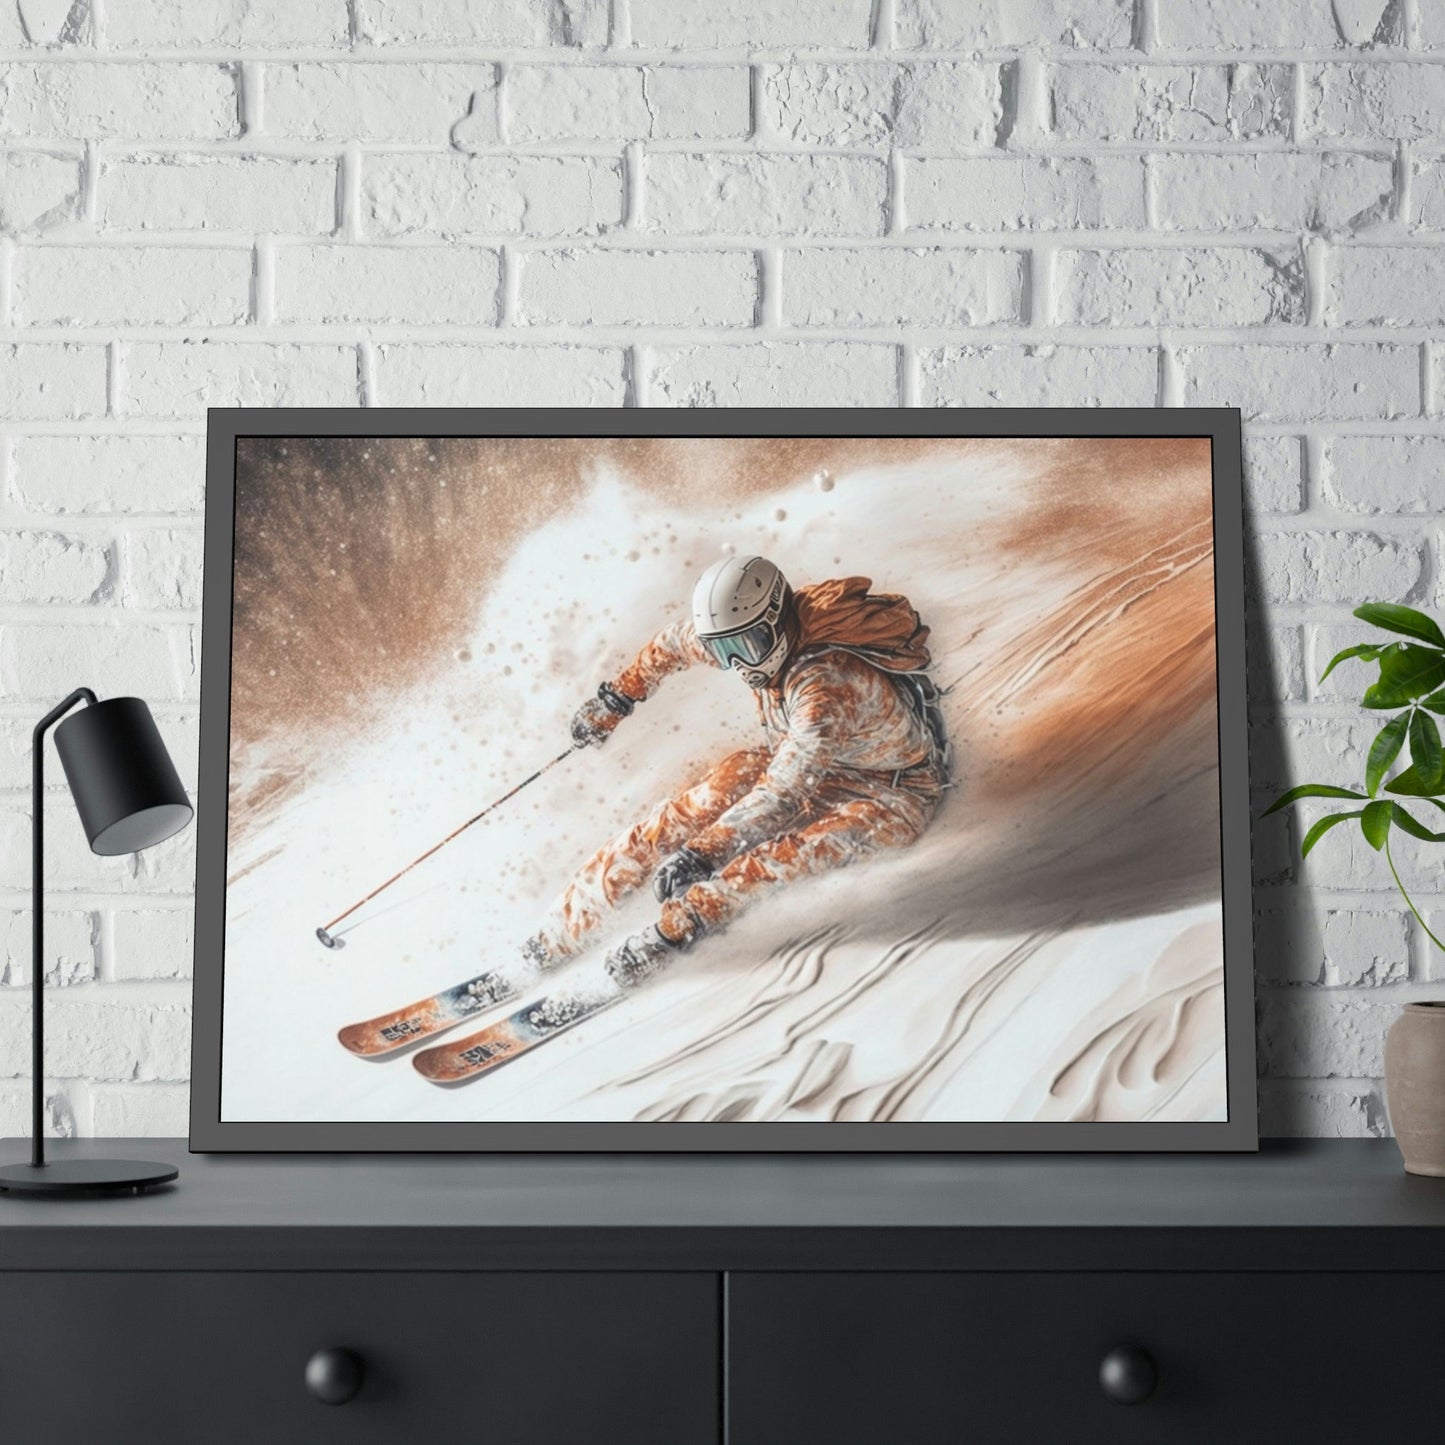 The Thrill of the Slopes: A Skiing Adventure on Canvas